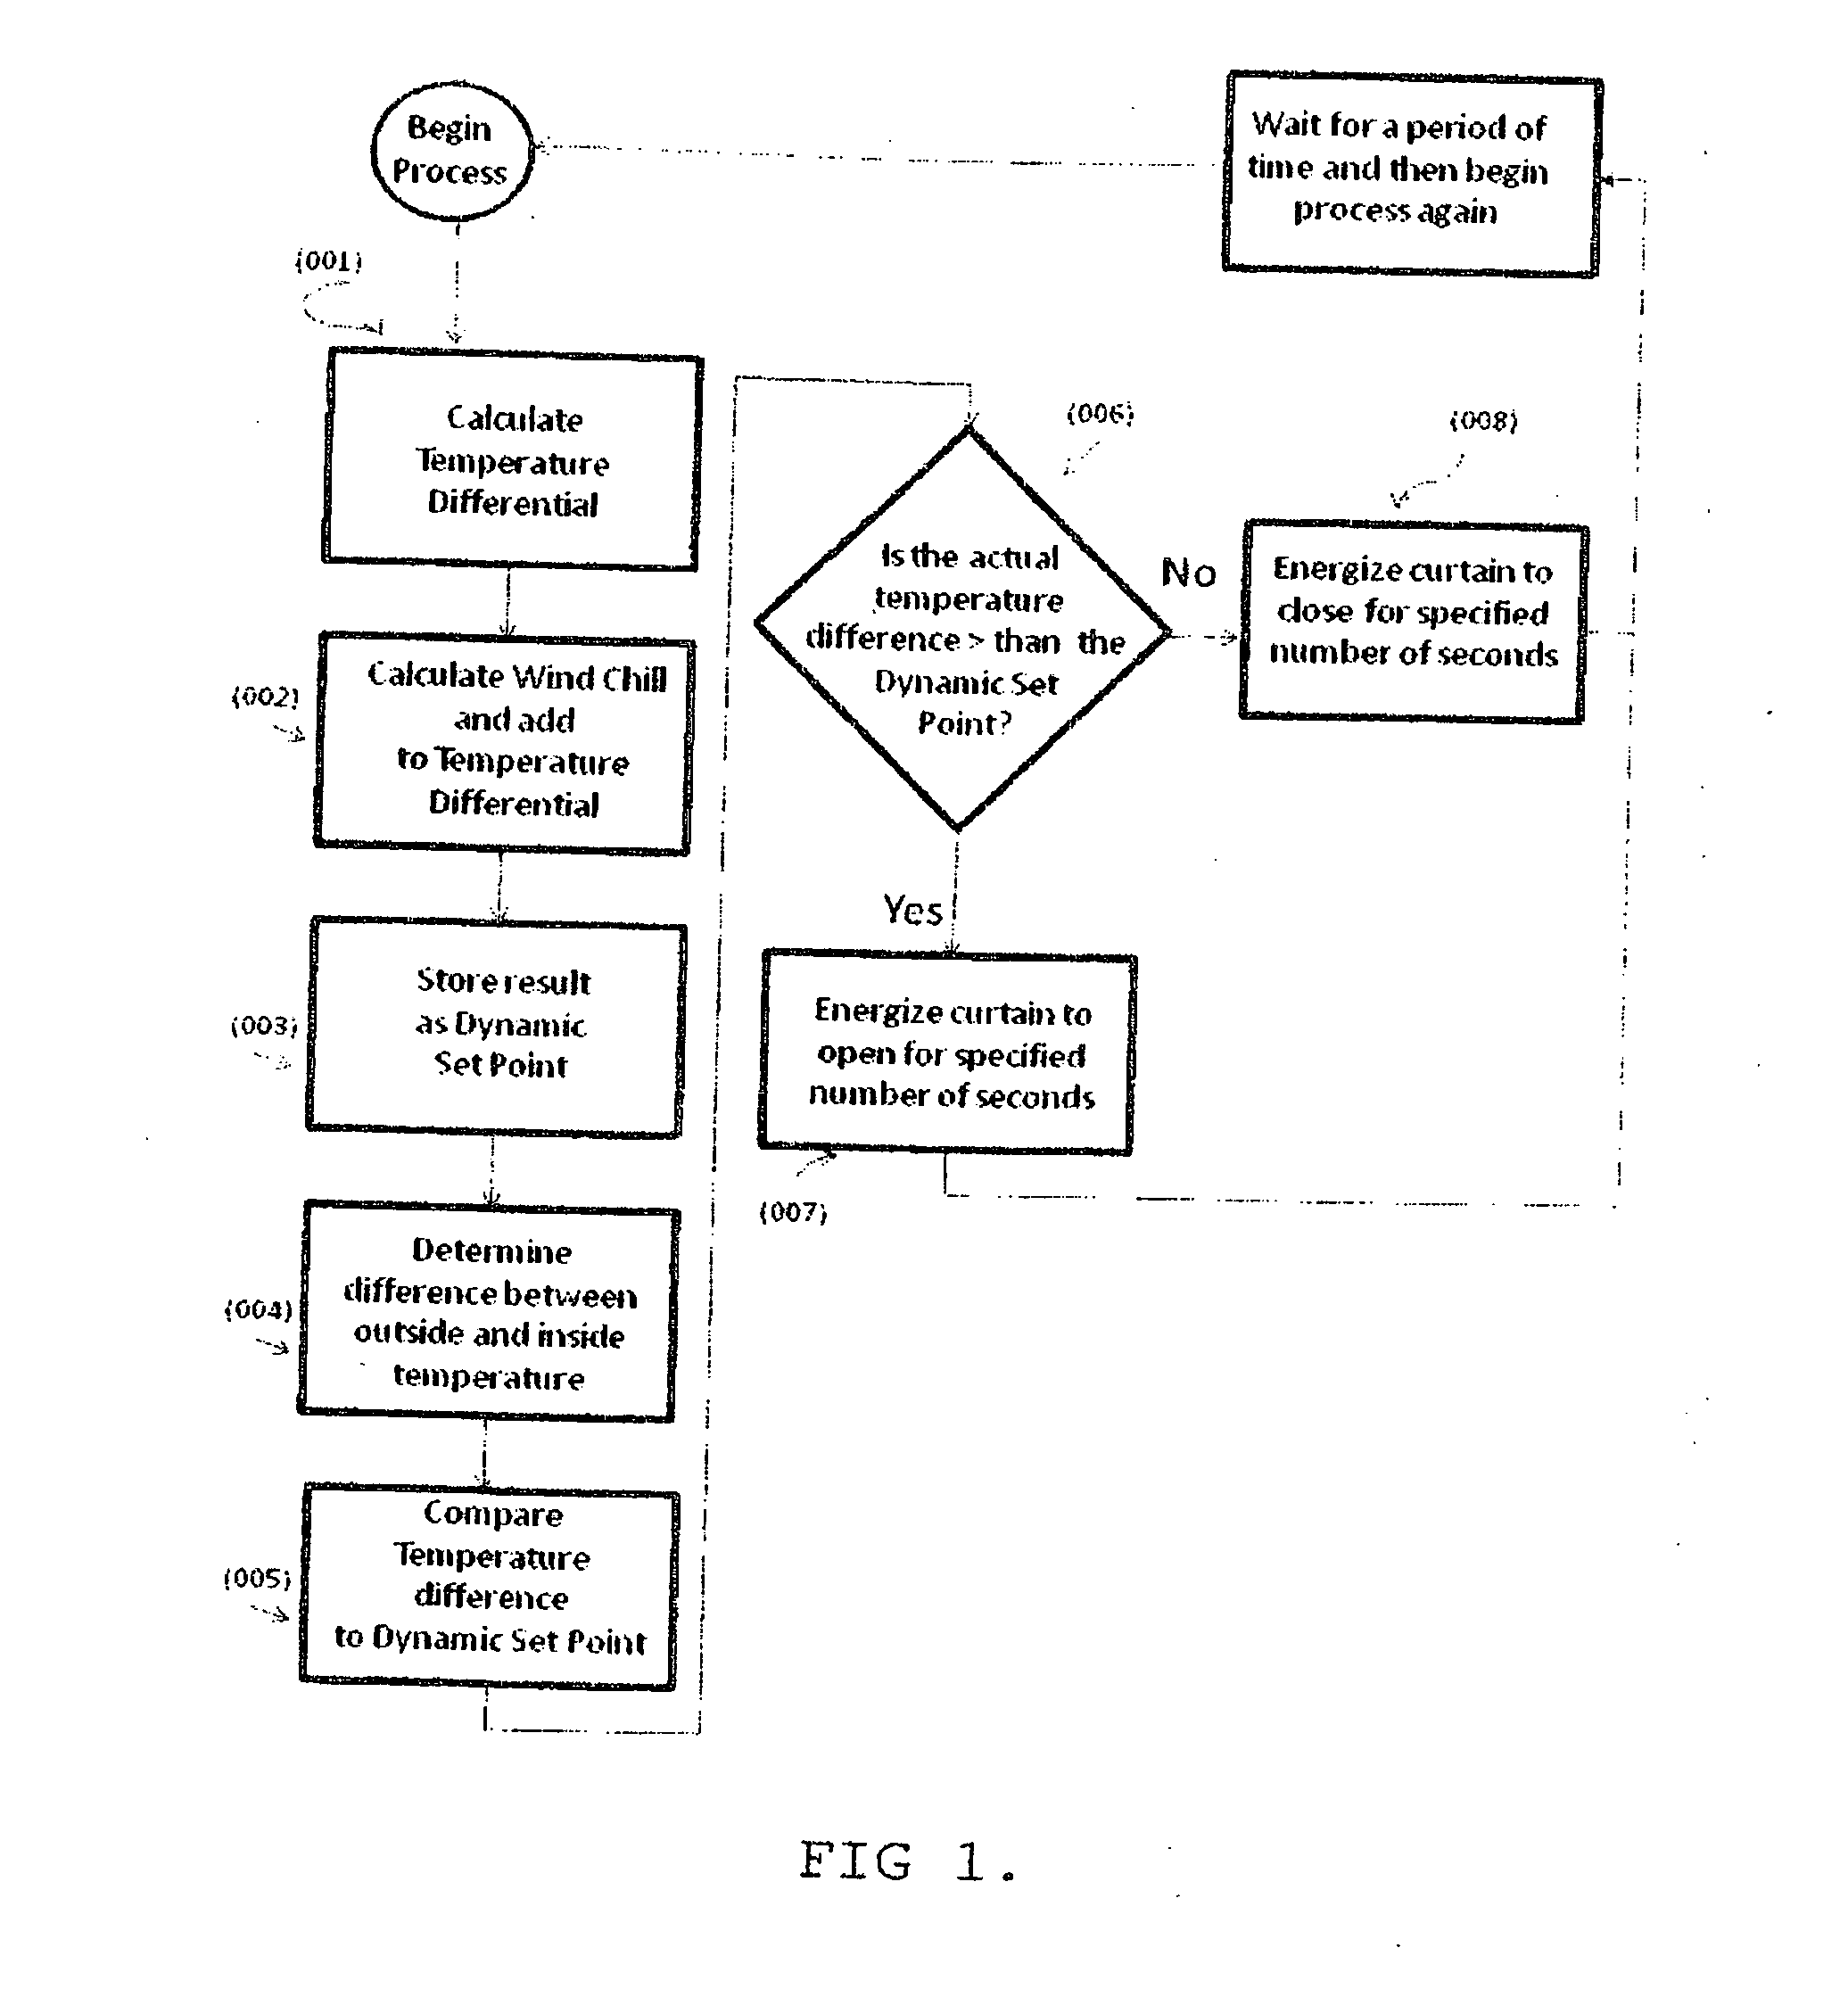 Method for controlling environmental conditions of livestock based upon the dynamics between temperature and wind chill